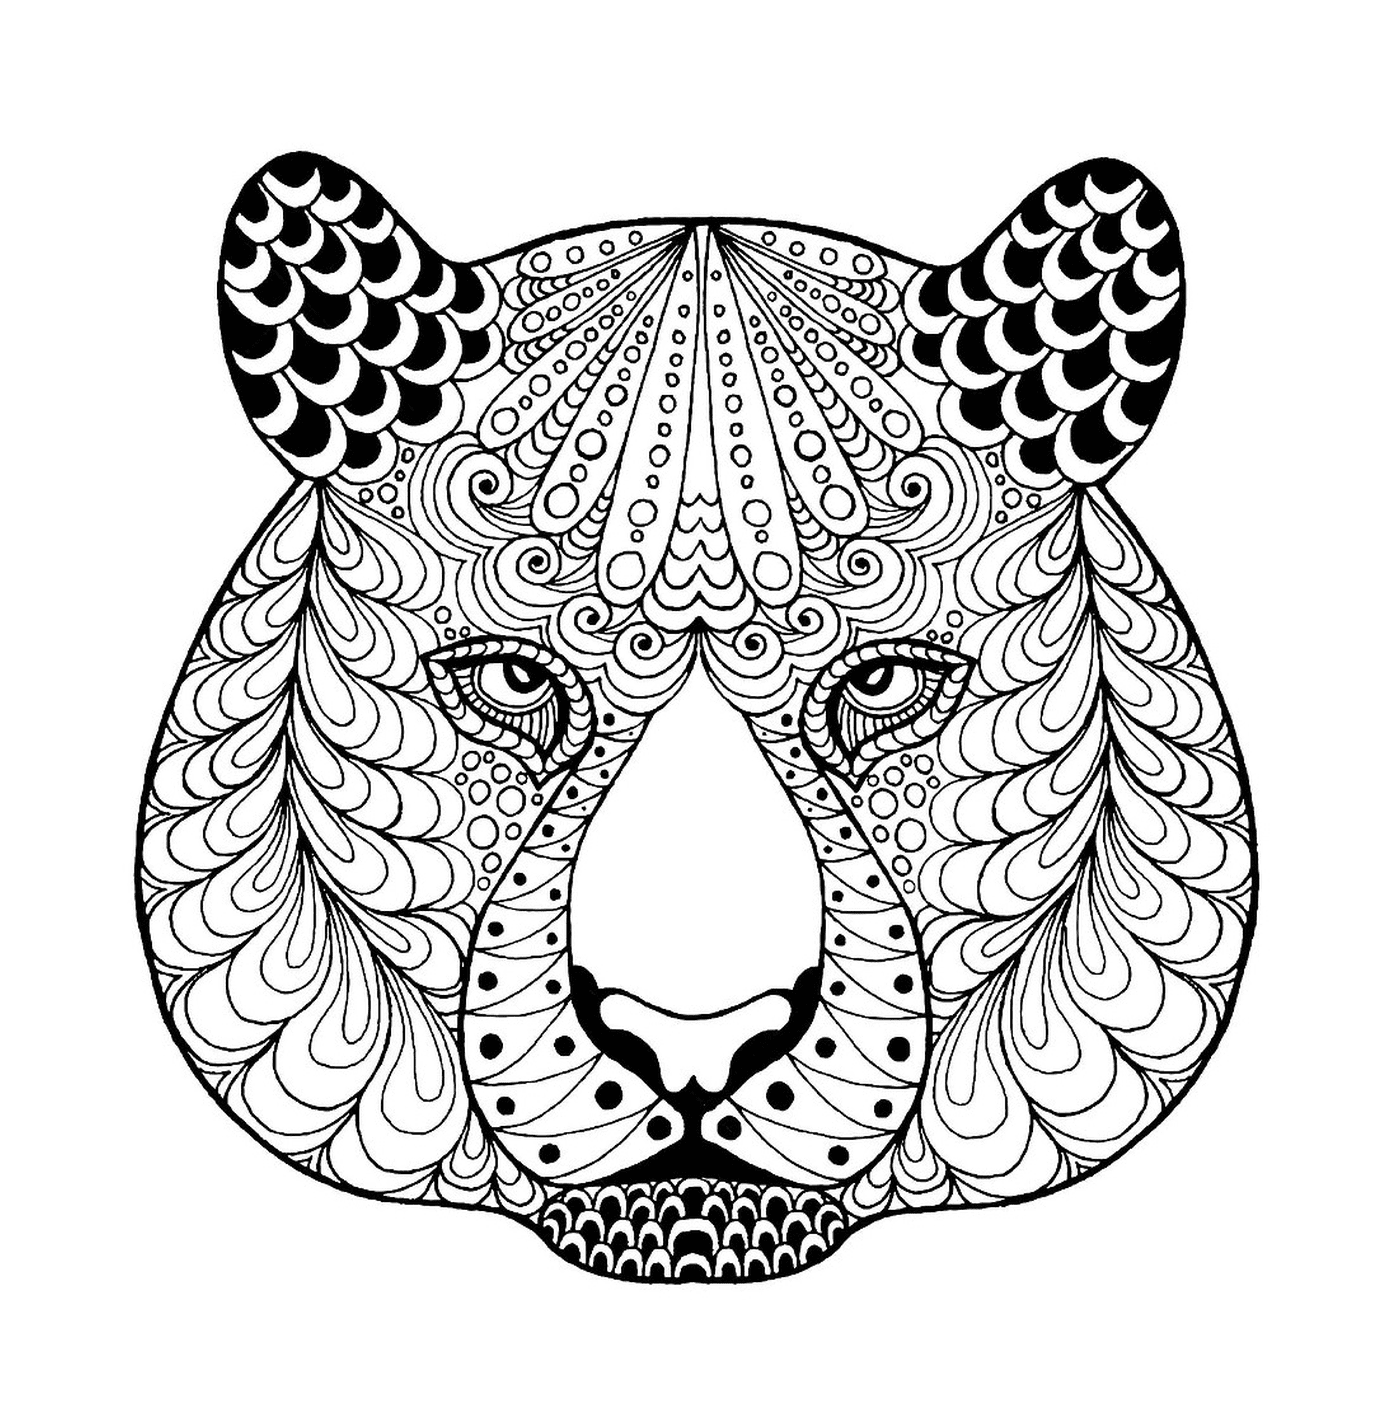  A zentangle tiger head with patterns 